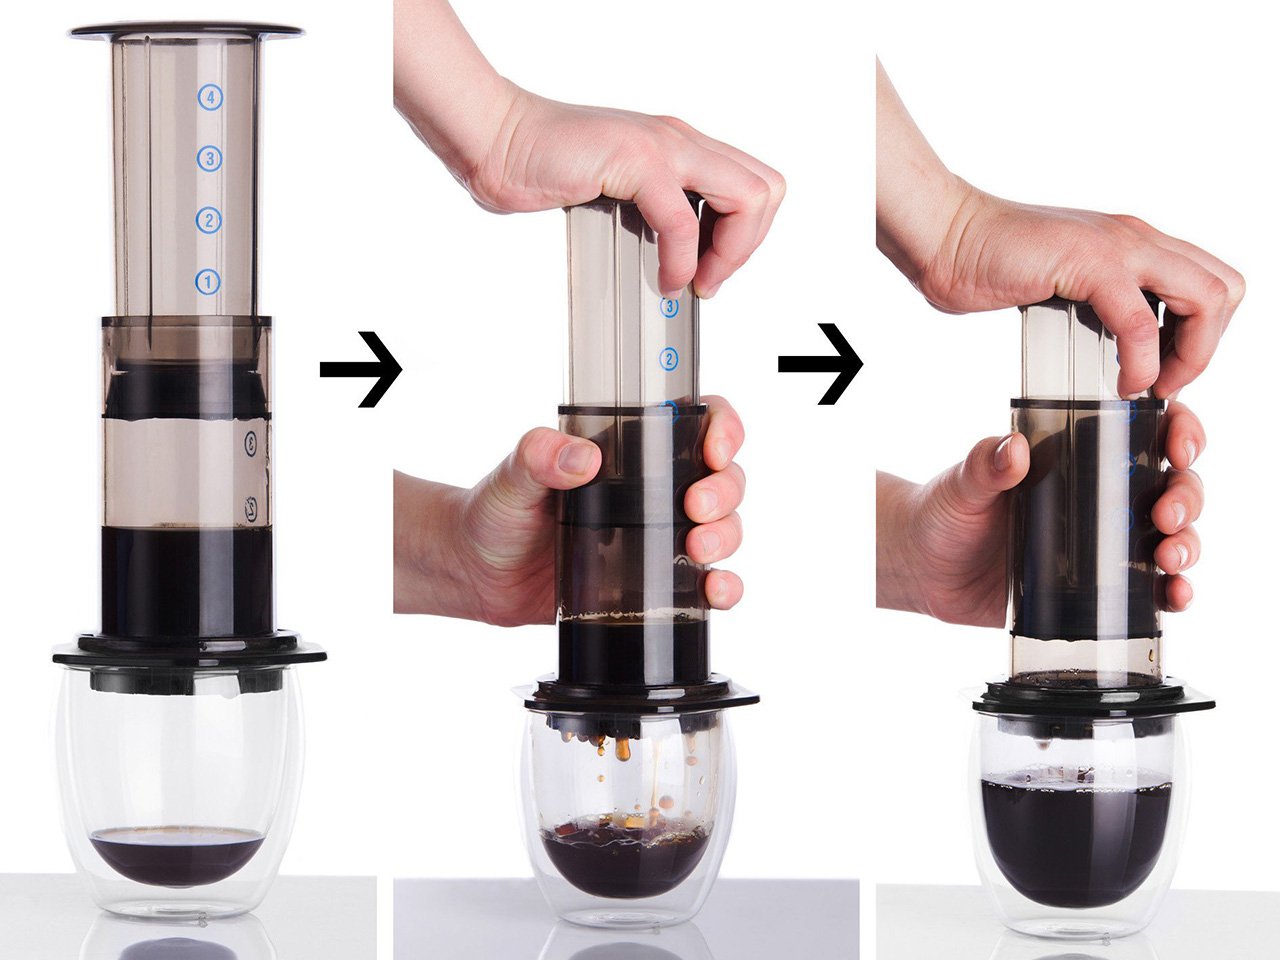 Image of a person brewing coffee using an AeroPress coffeemaker